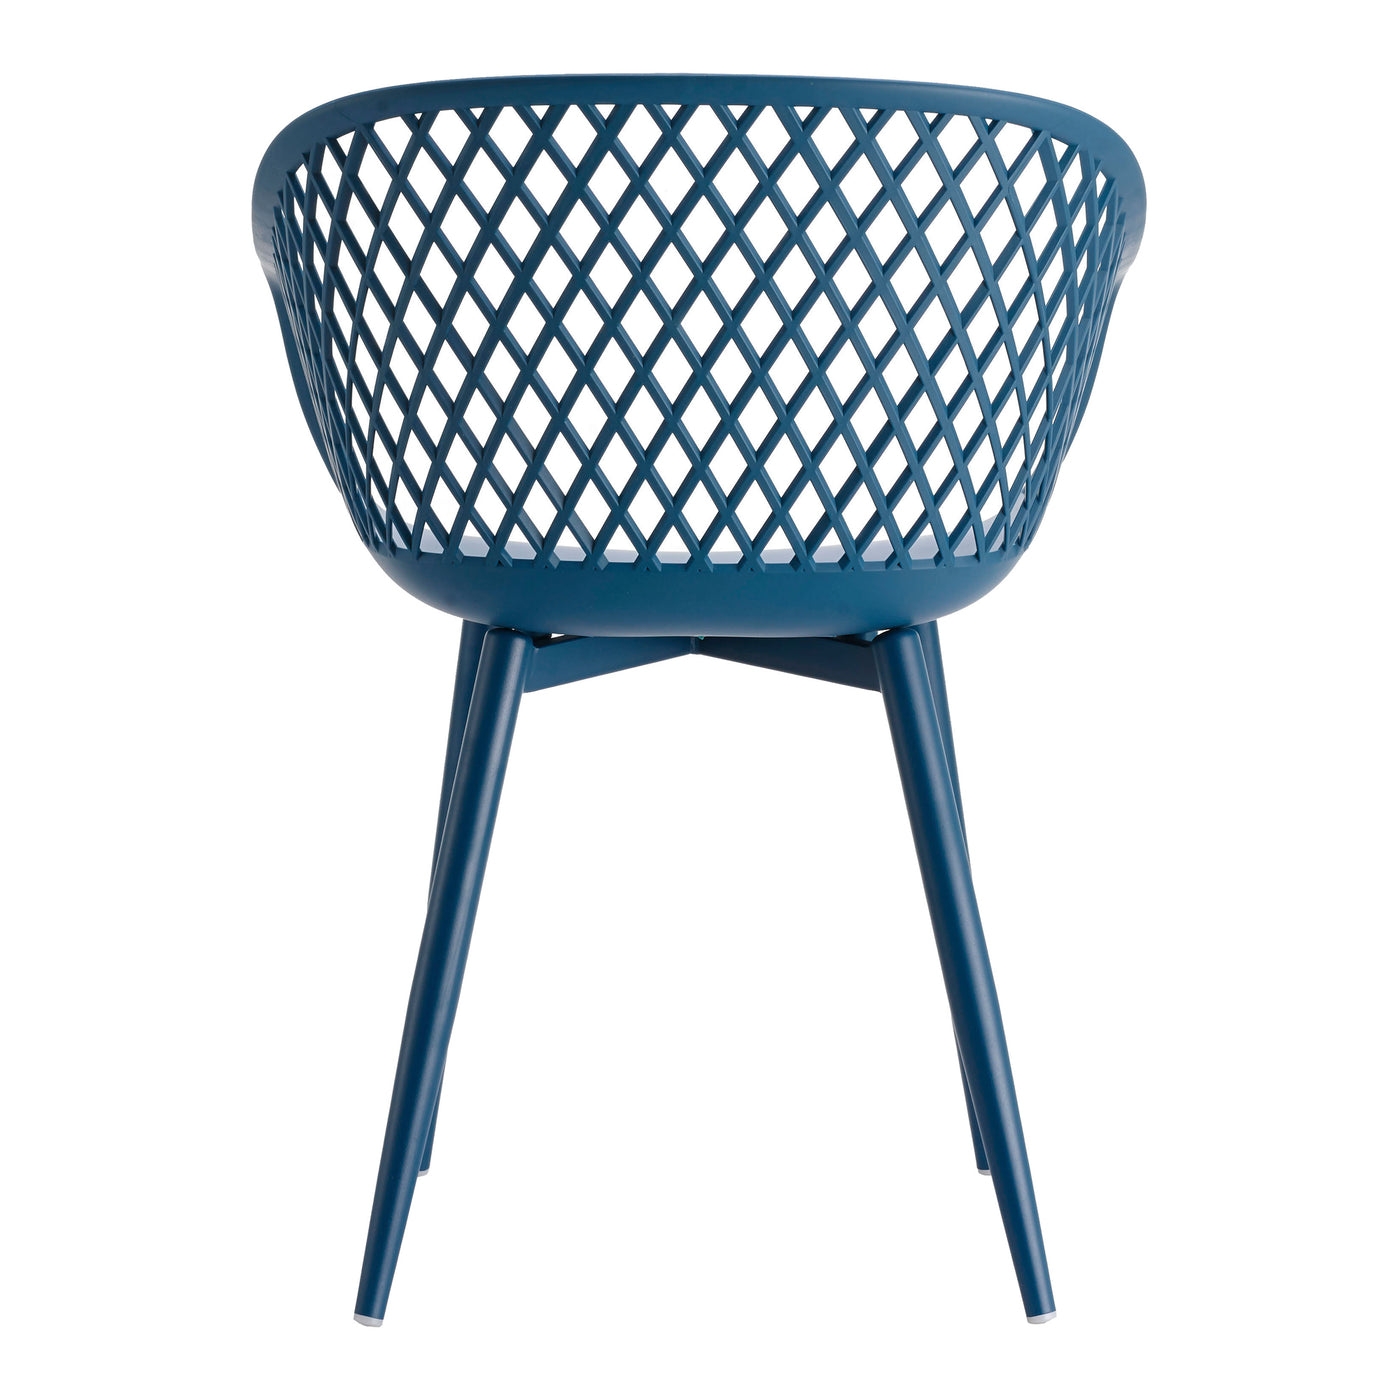 Take a seat in the stylish and comfortable Piazza Chair. Made with a durable polypropylene, this chair comes in several co...